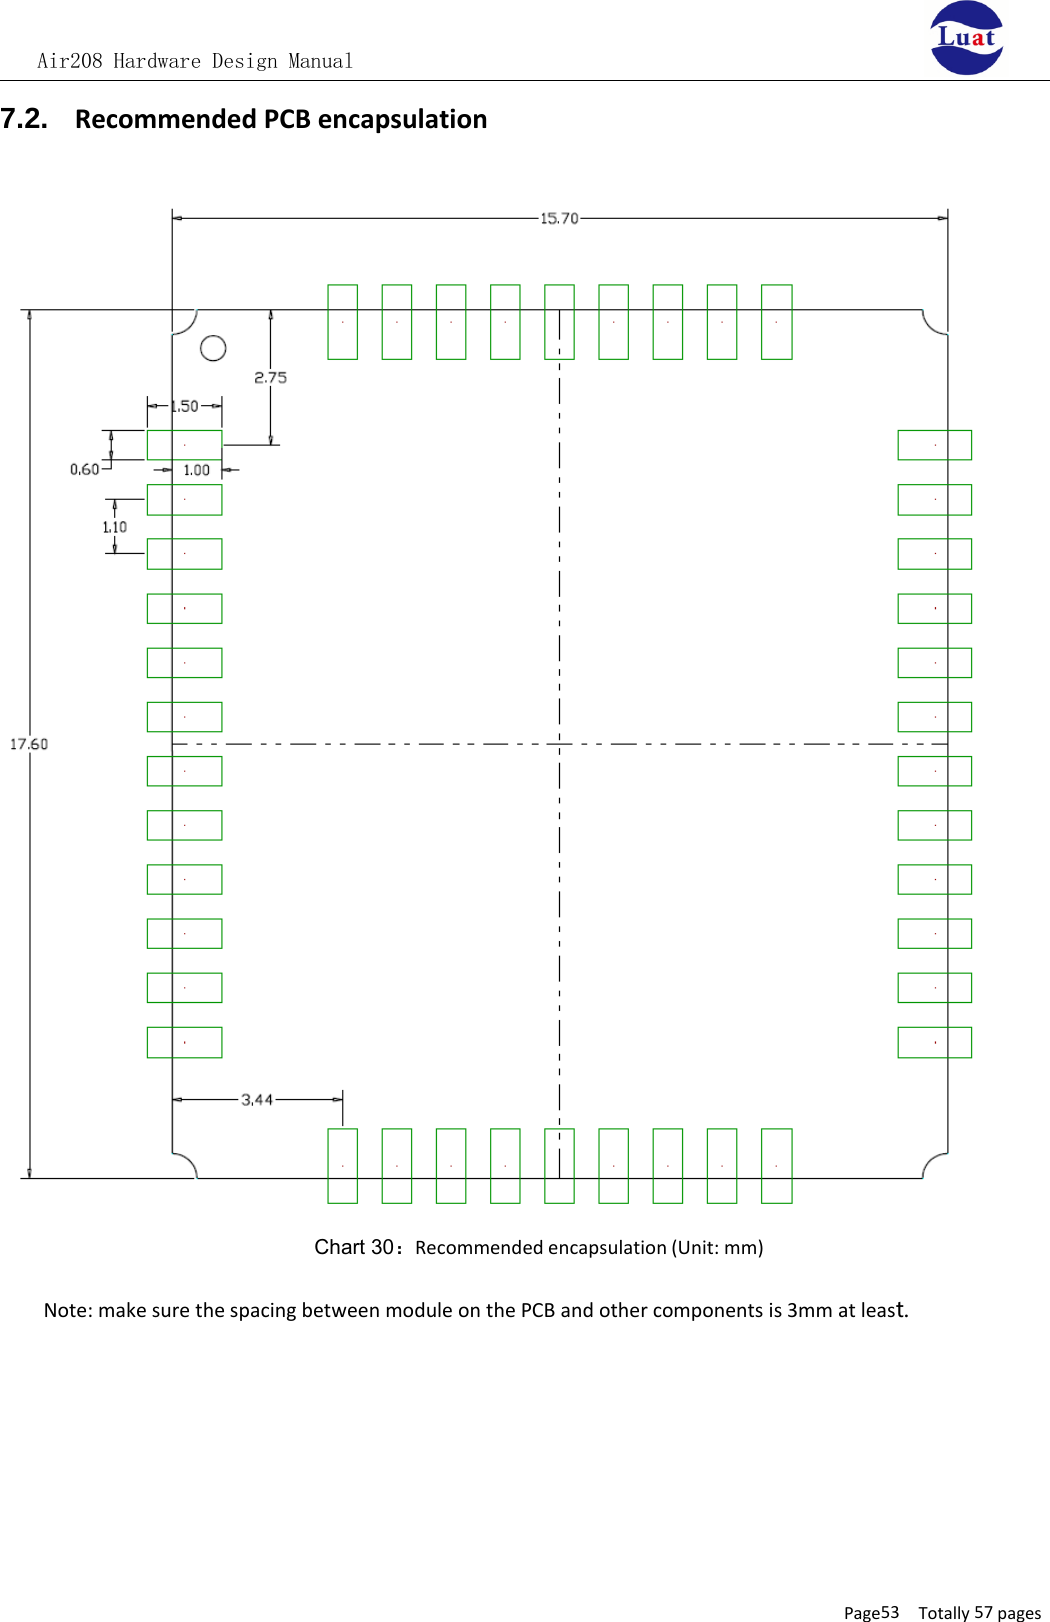 Air208 Hardware Design ManualPage53 Totally 57 pages7.2. Recommended PCB encapsulationChart 30：Recommended encapsulation (Unit: mm)Note: make sure the spacing between module on the PCB and other components is 3mm at least.